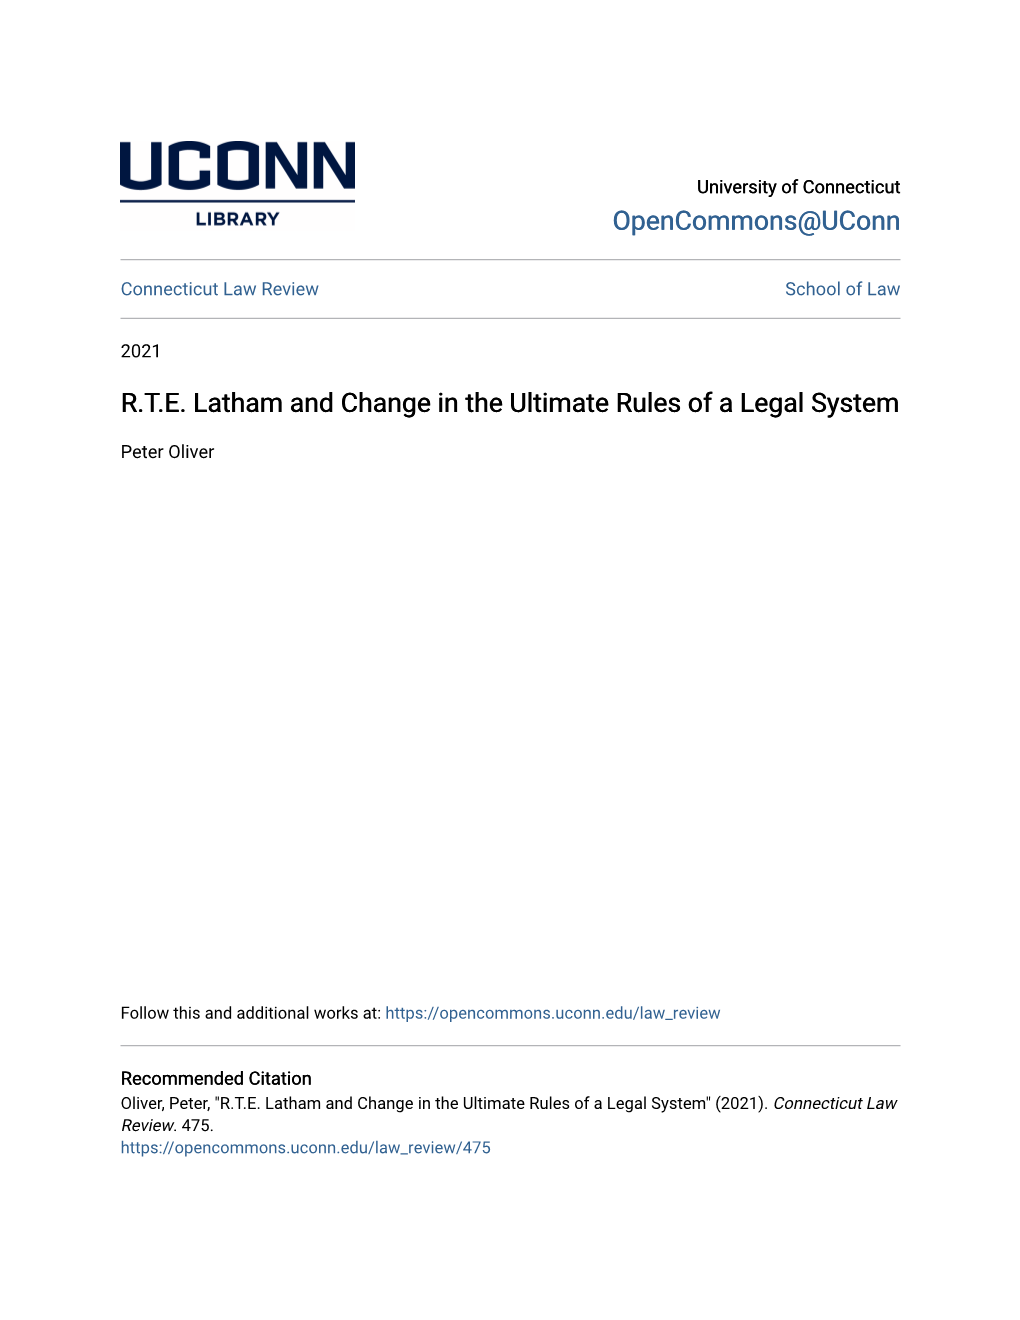 R.T.E. Latham and Change in the Ultimate Rules of a Legal System